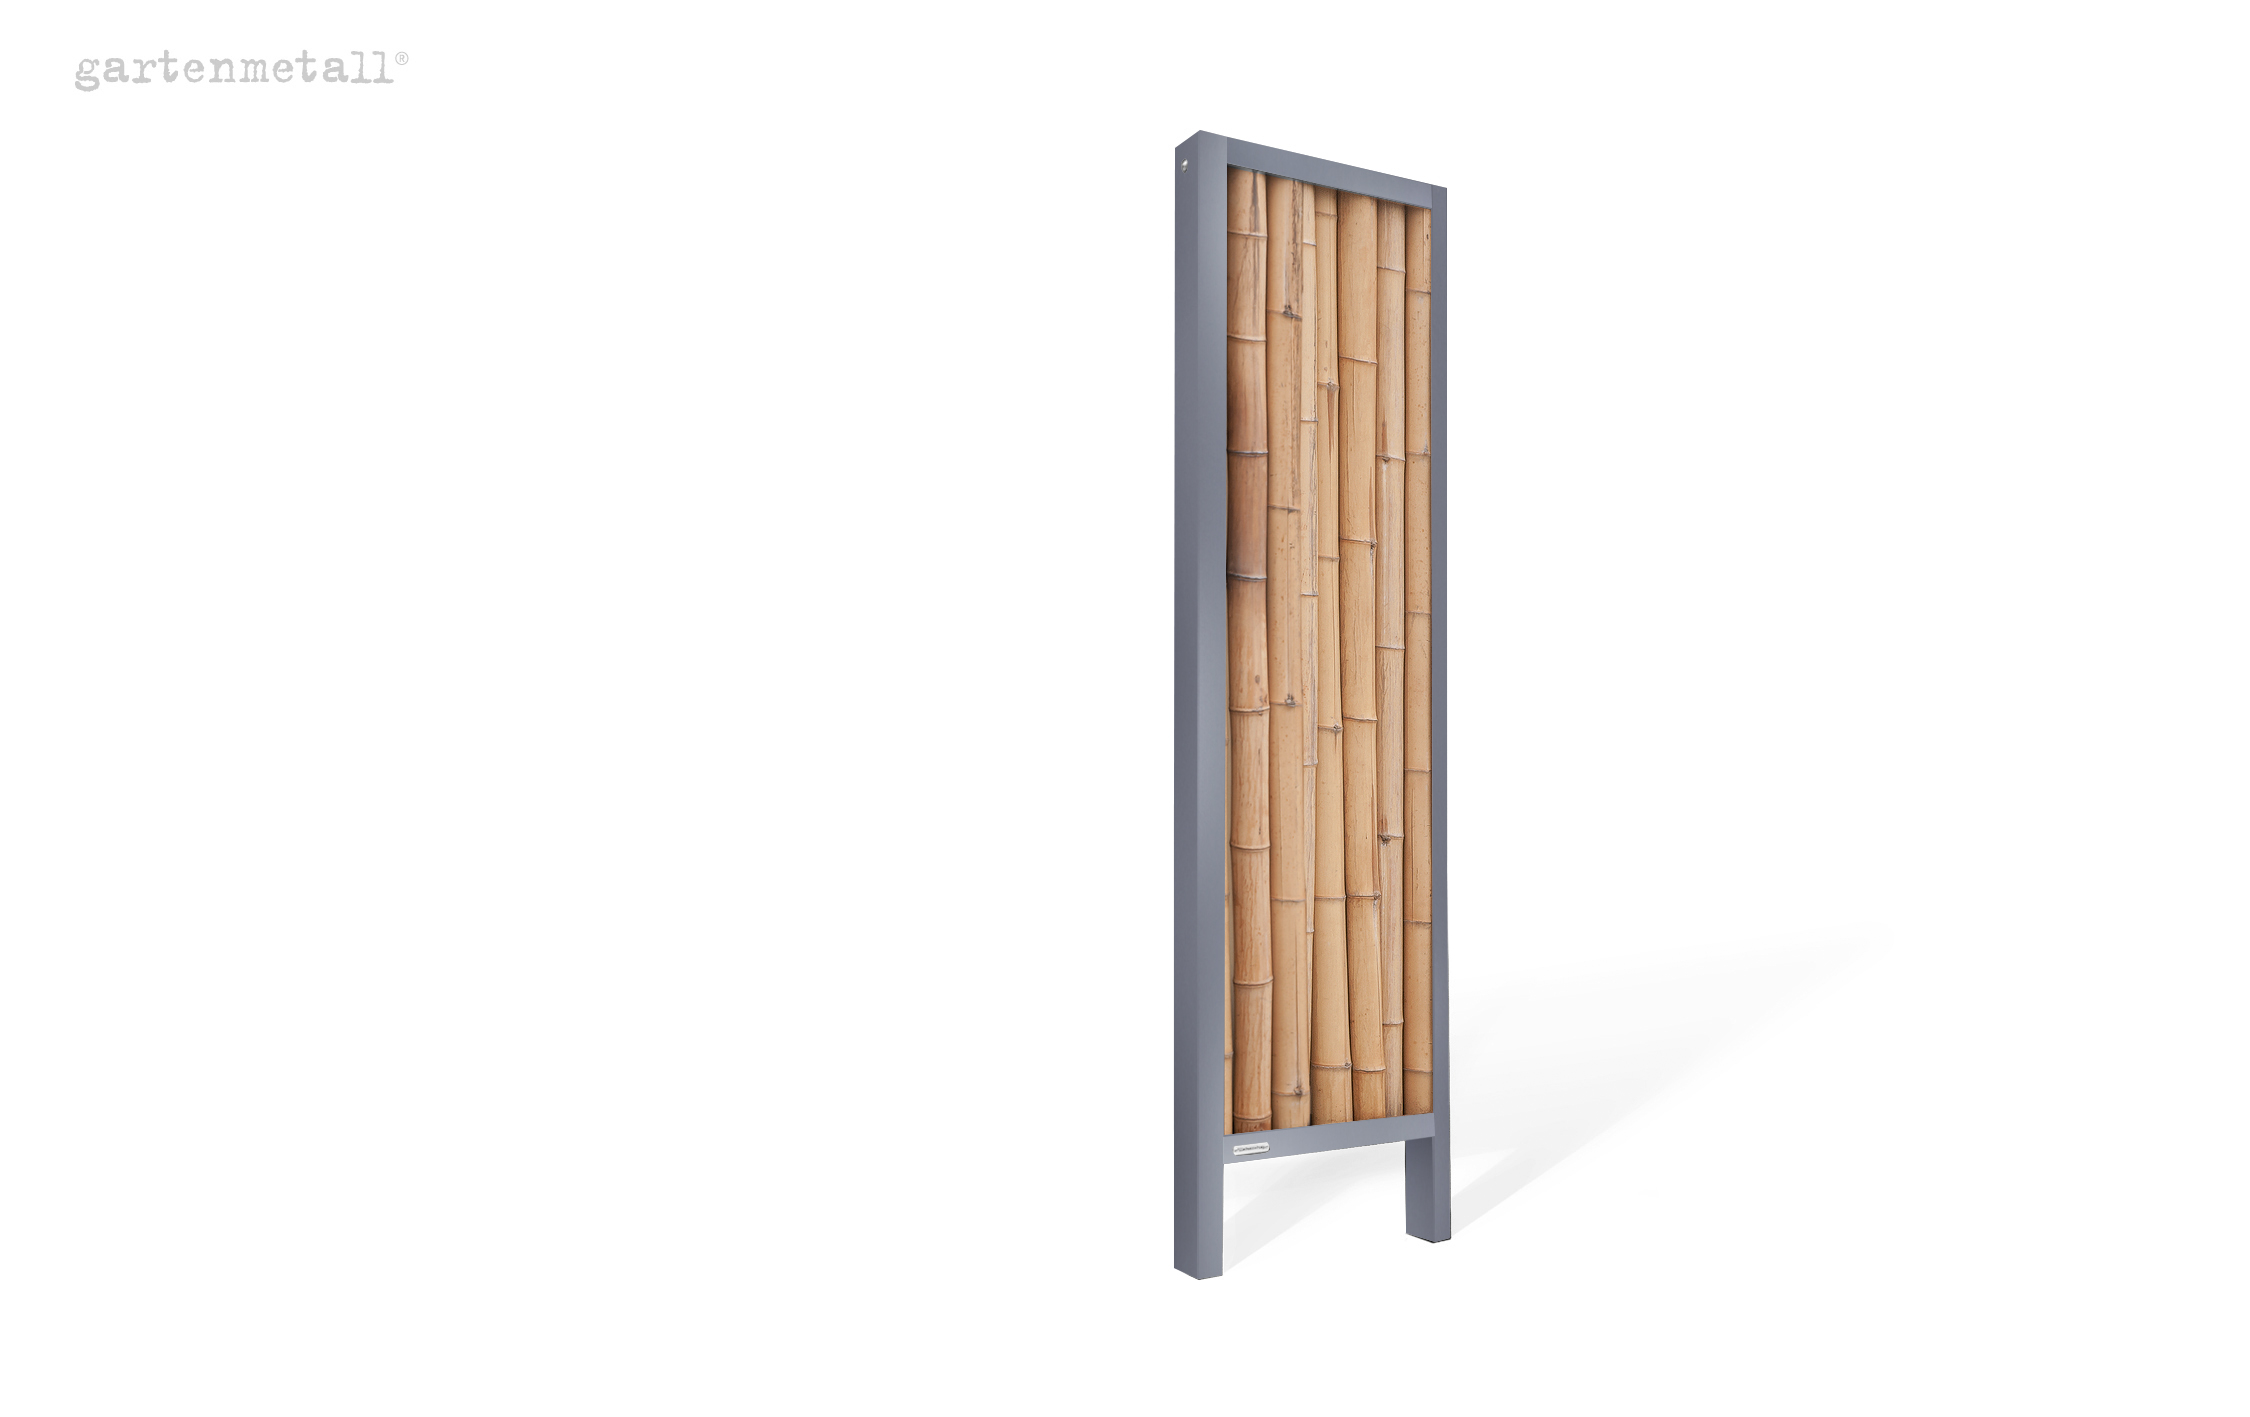 Privacy screen WANDA VARIO - complete with bamboo poles Ø45mm